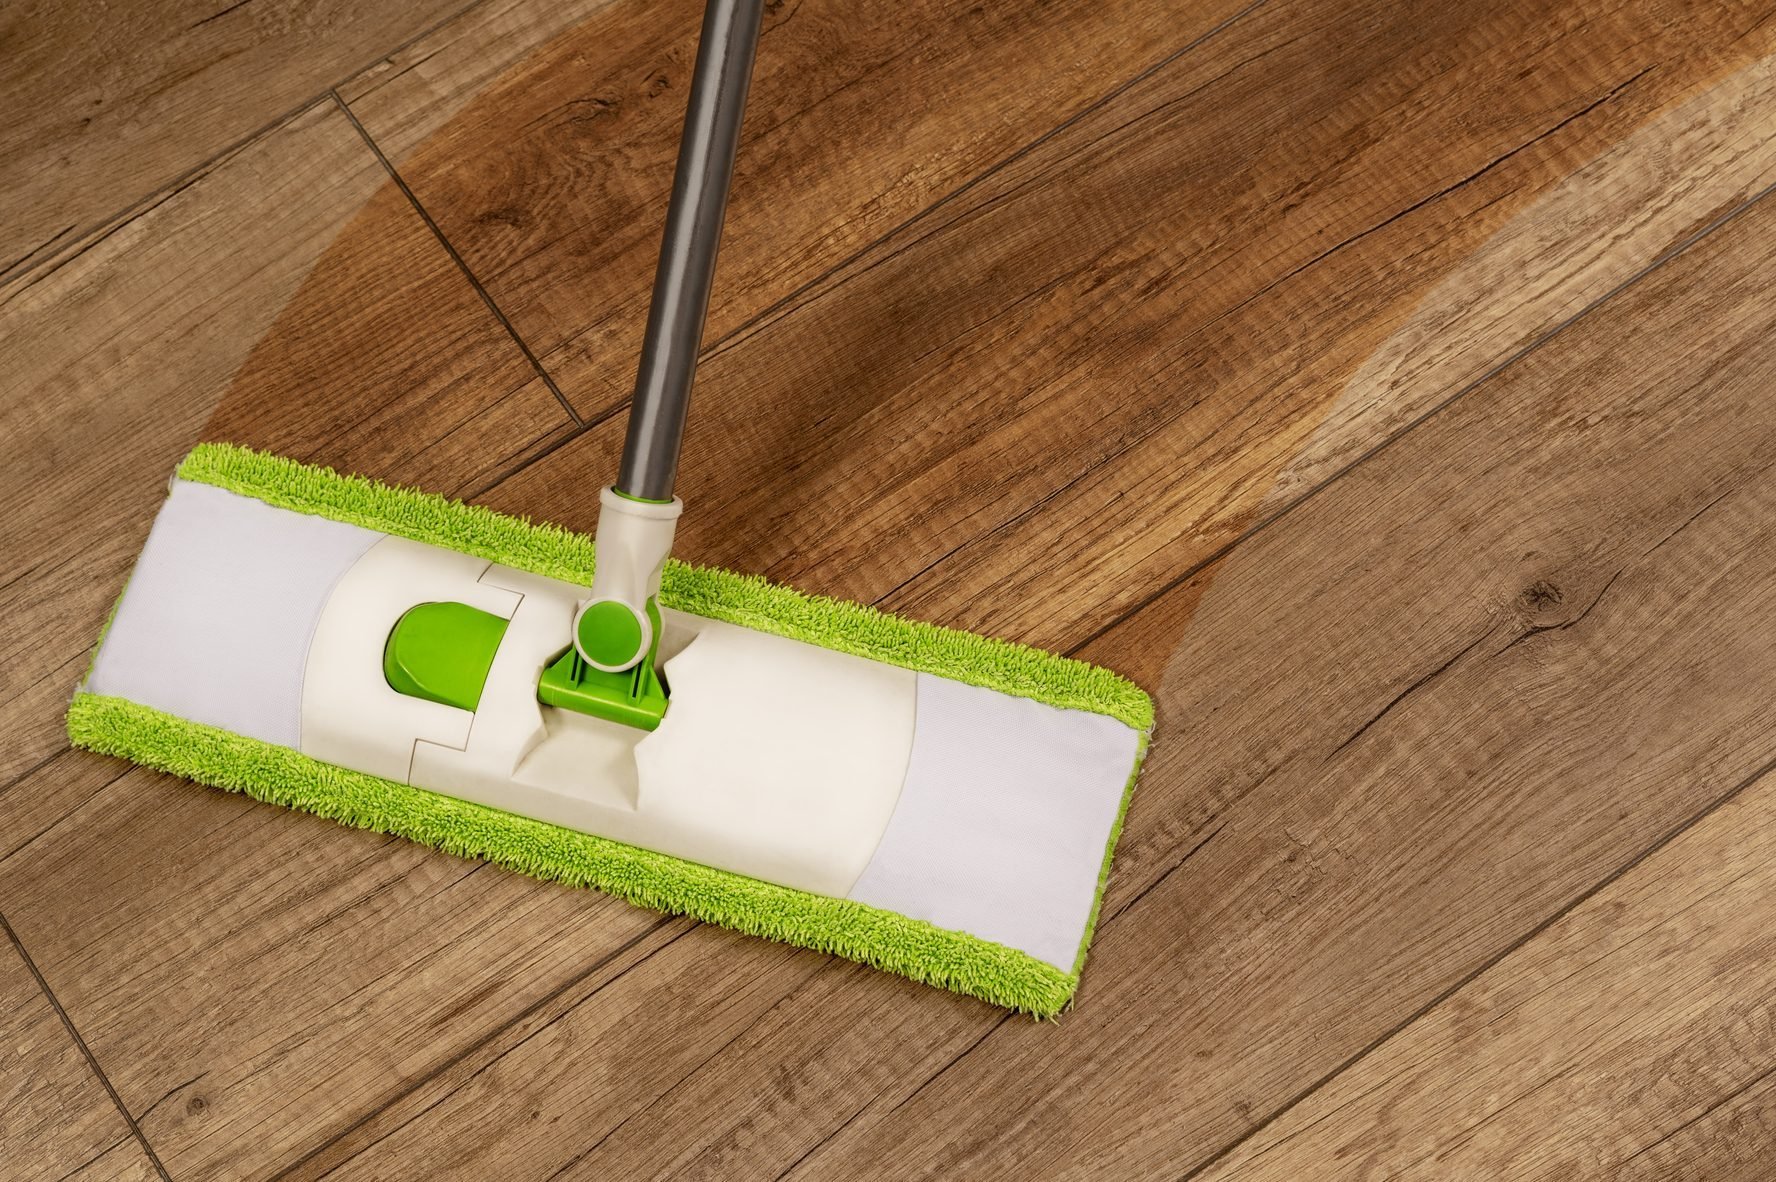 Can You Use a Steam Mop on Vinyl Plank Flooring? - Household Advice